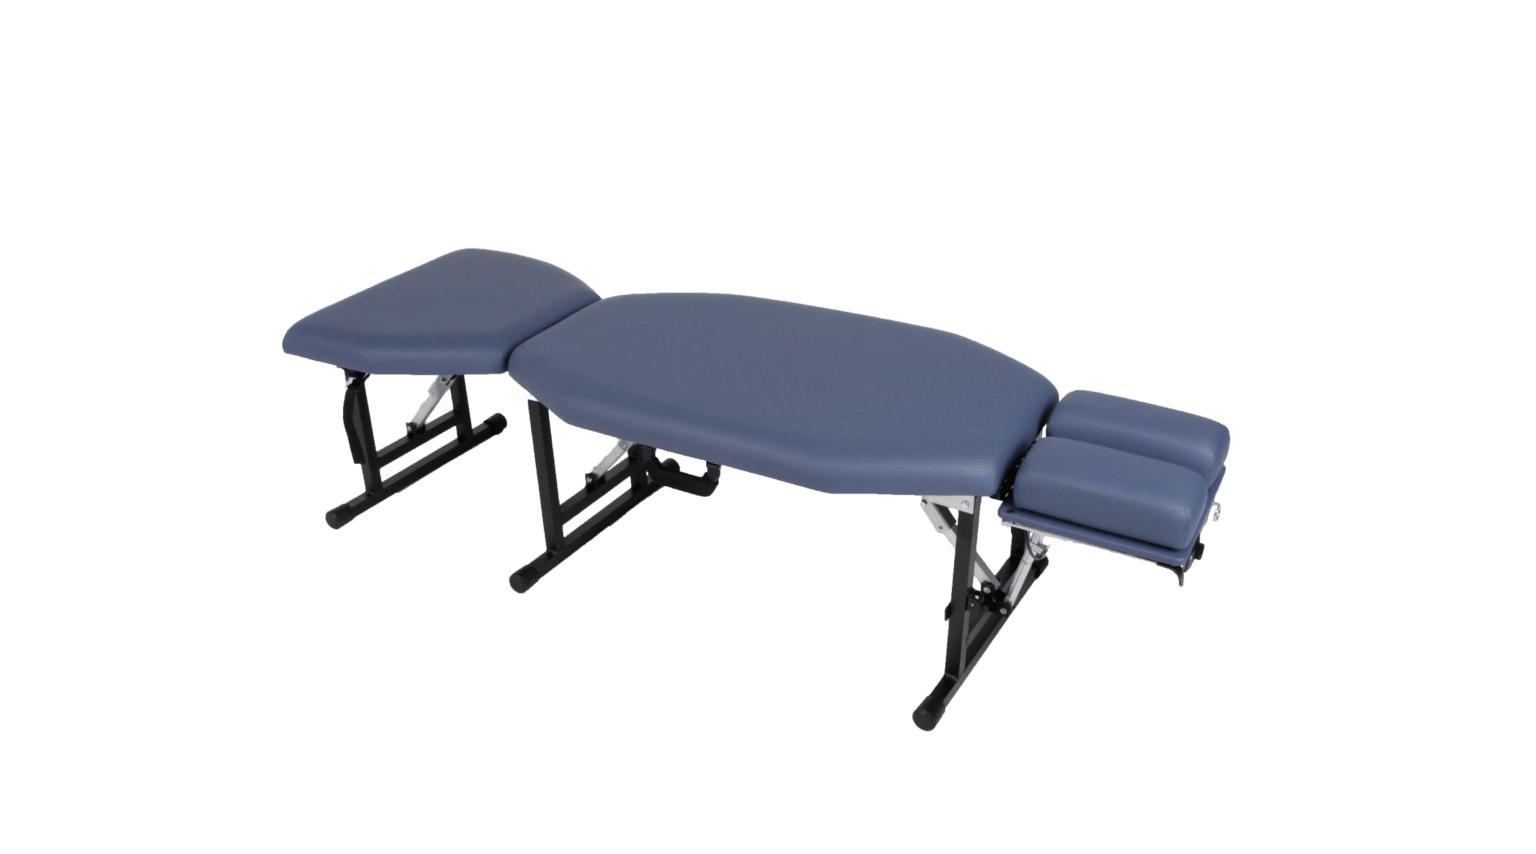 Blue Lifetimer International LT-60 portable chiropractic adjustment drop treatment table also for physical therapy and massage